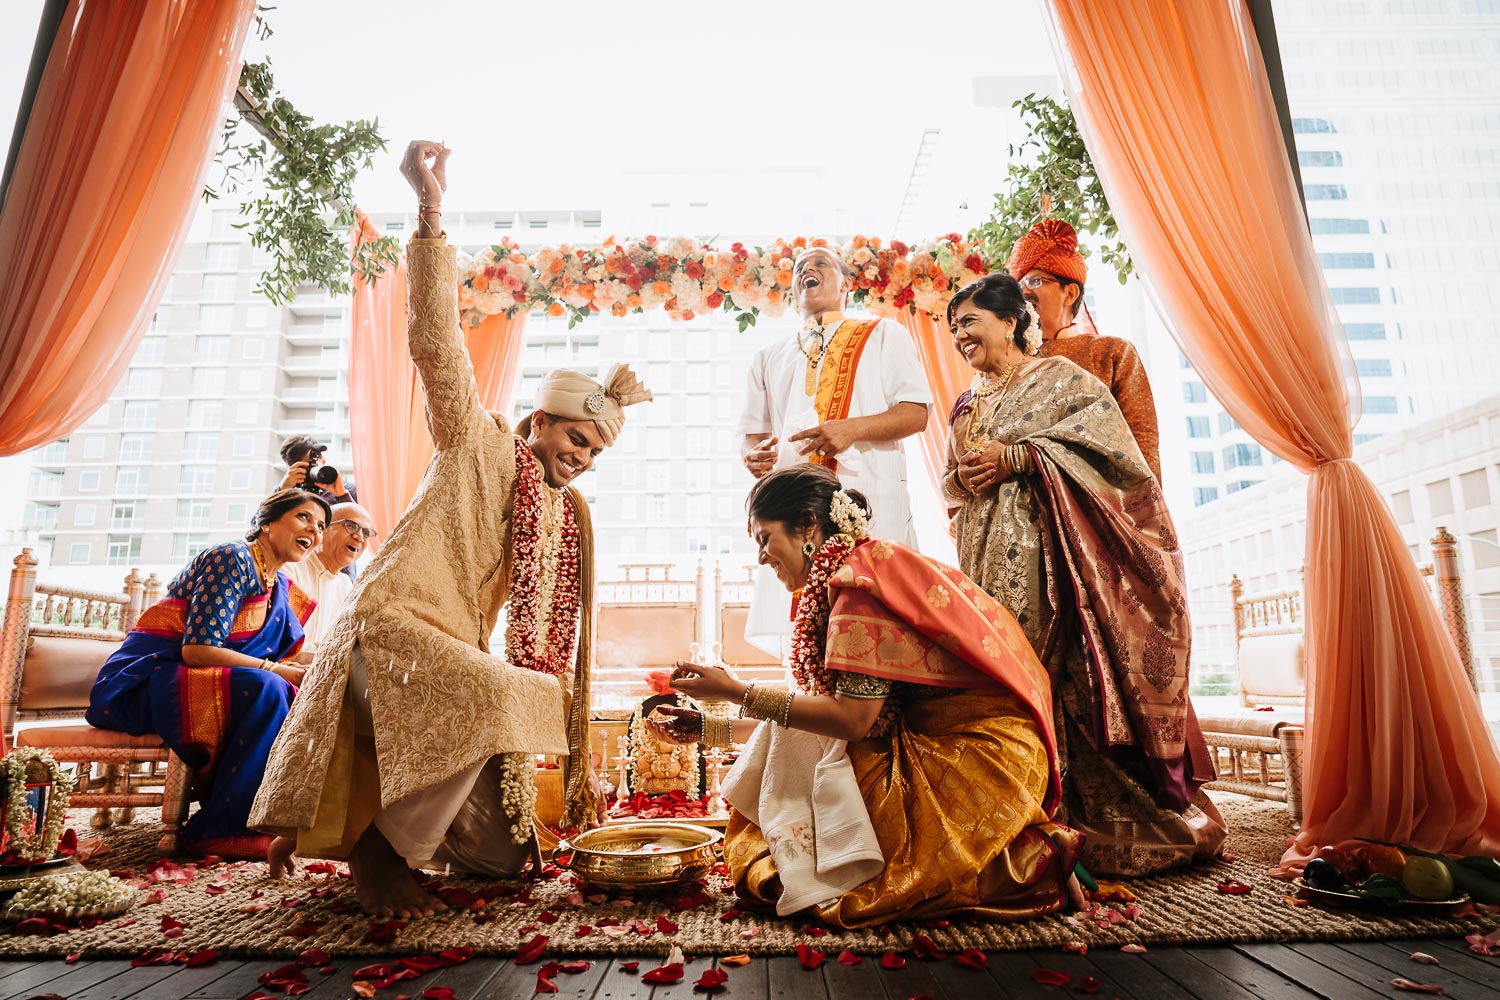 During a south asian wedding ceremony play a game find the ring at Brazos Hall in Austin Texas